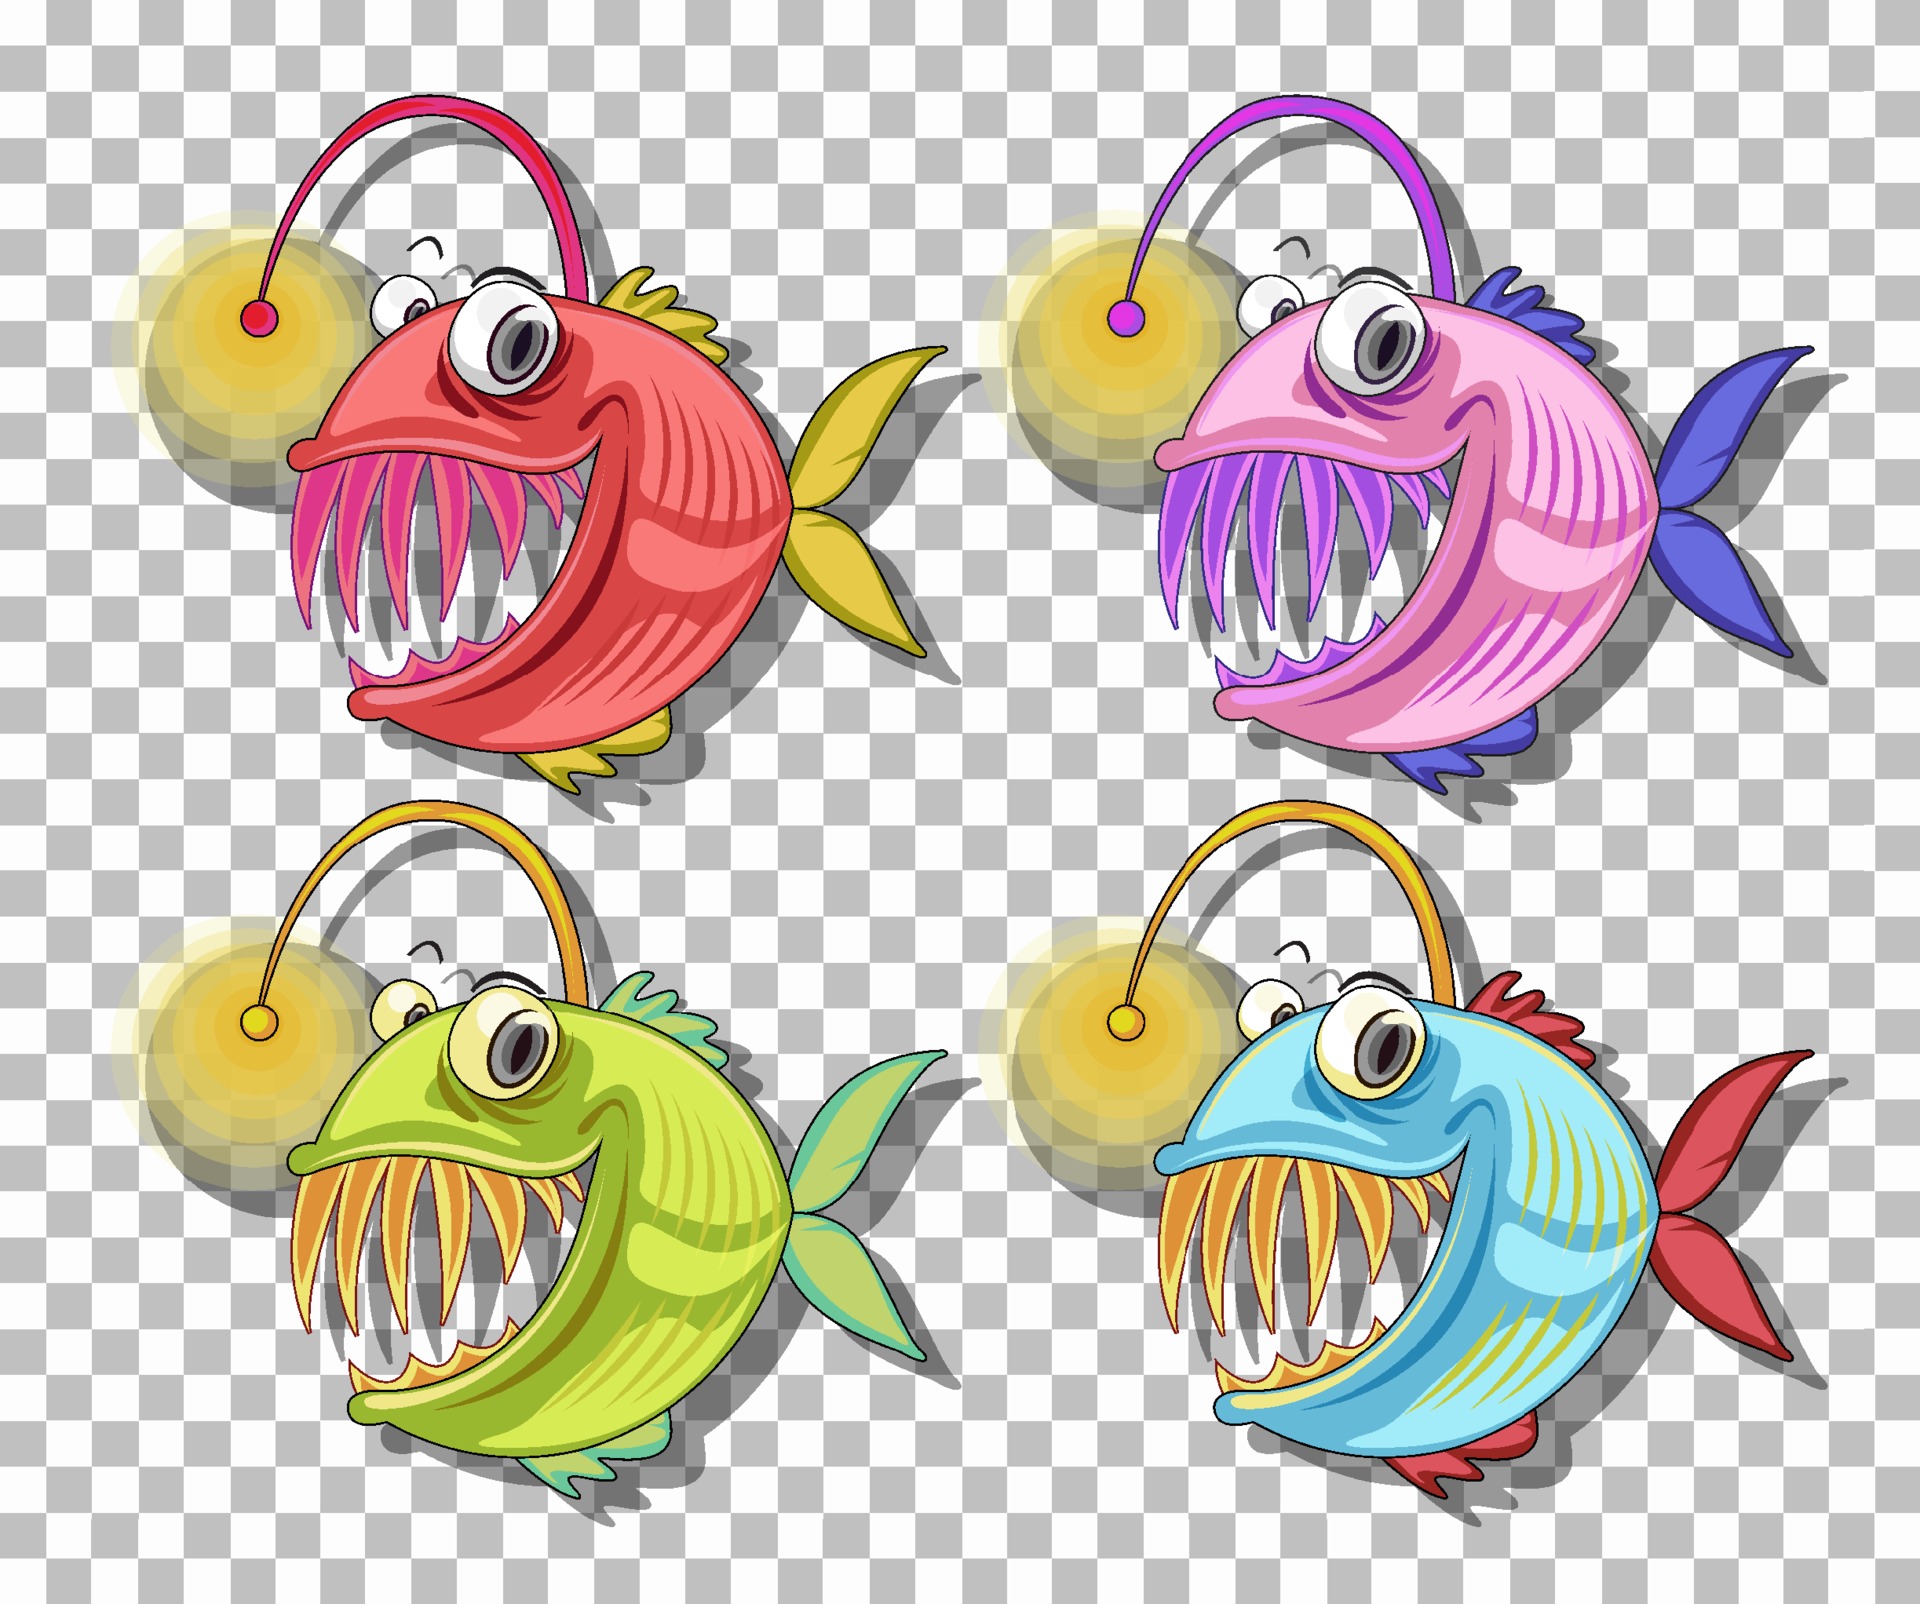 Angler Fish cartoon character isolated on transparent background